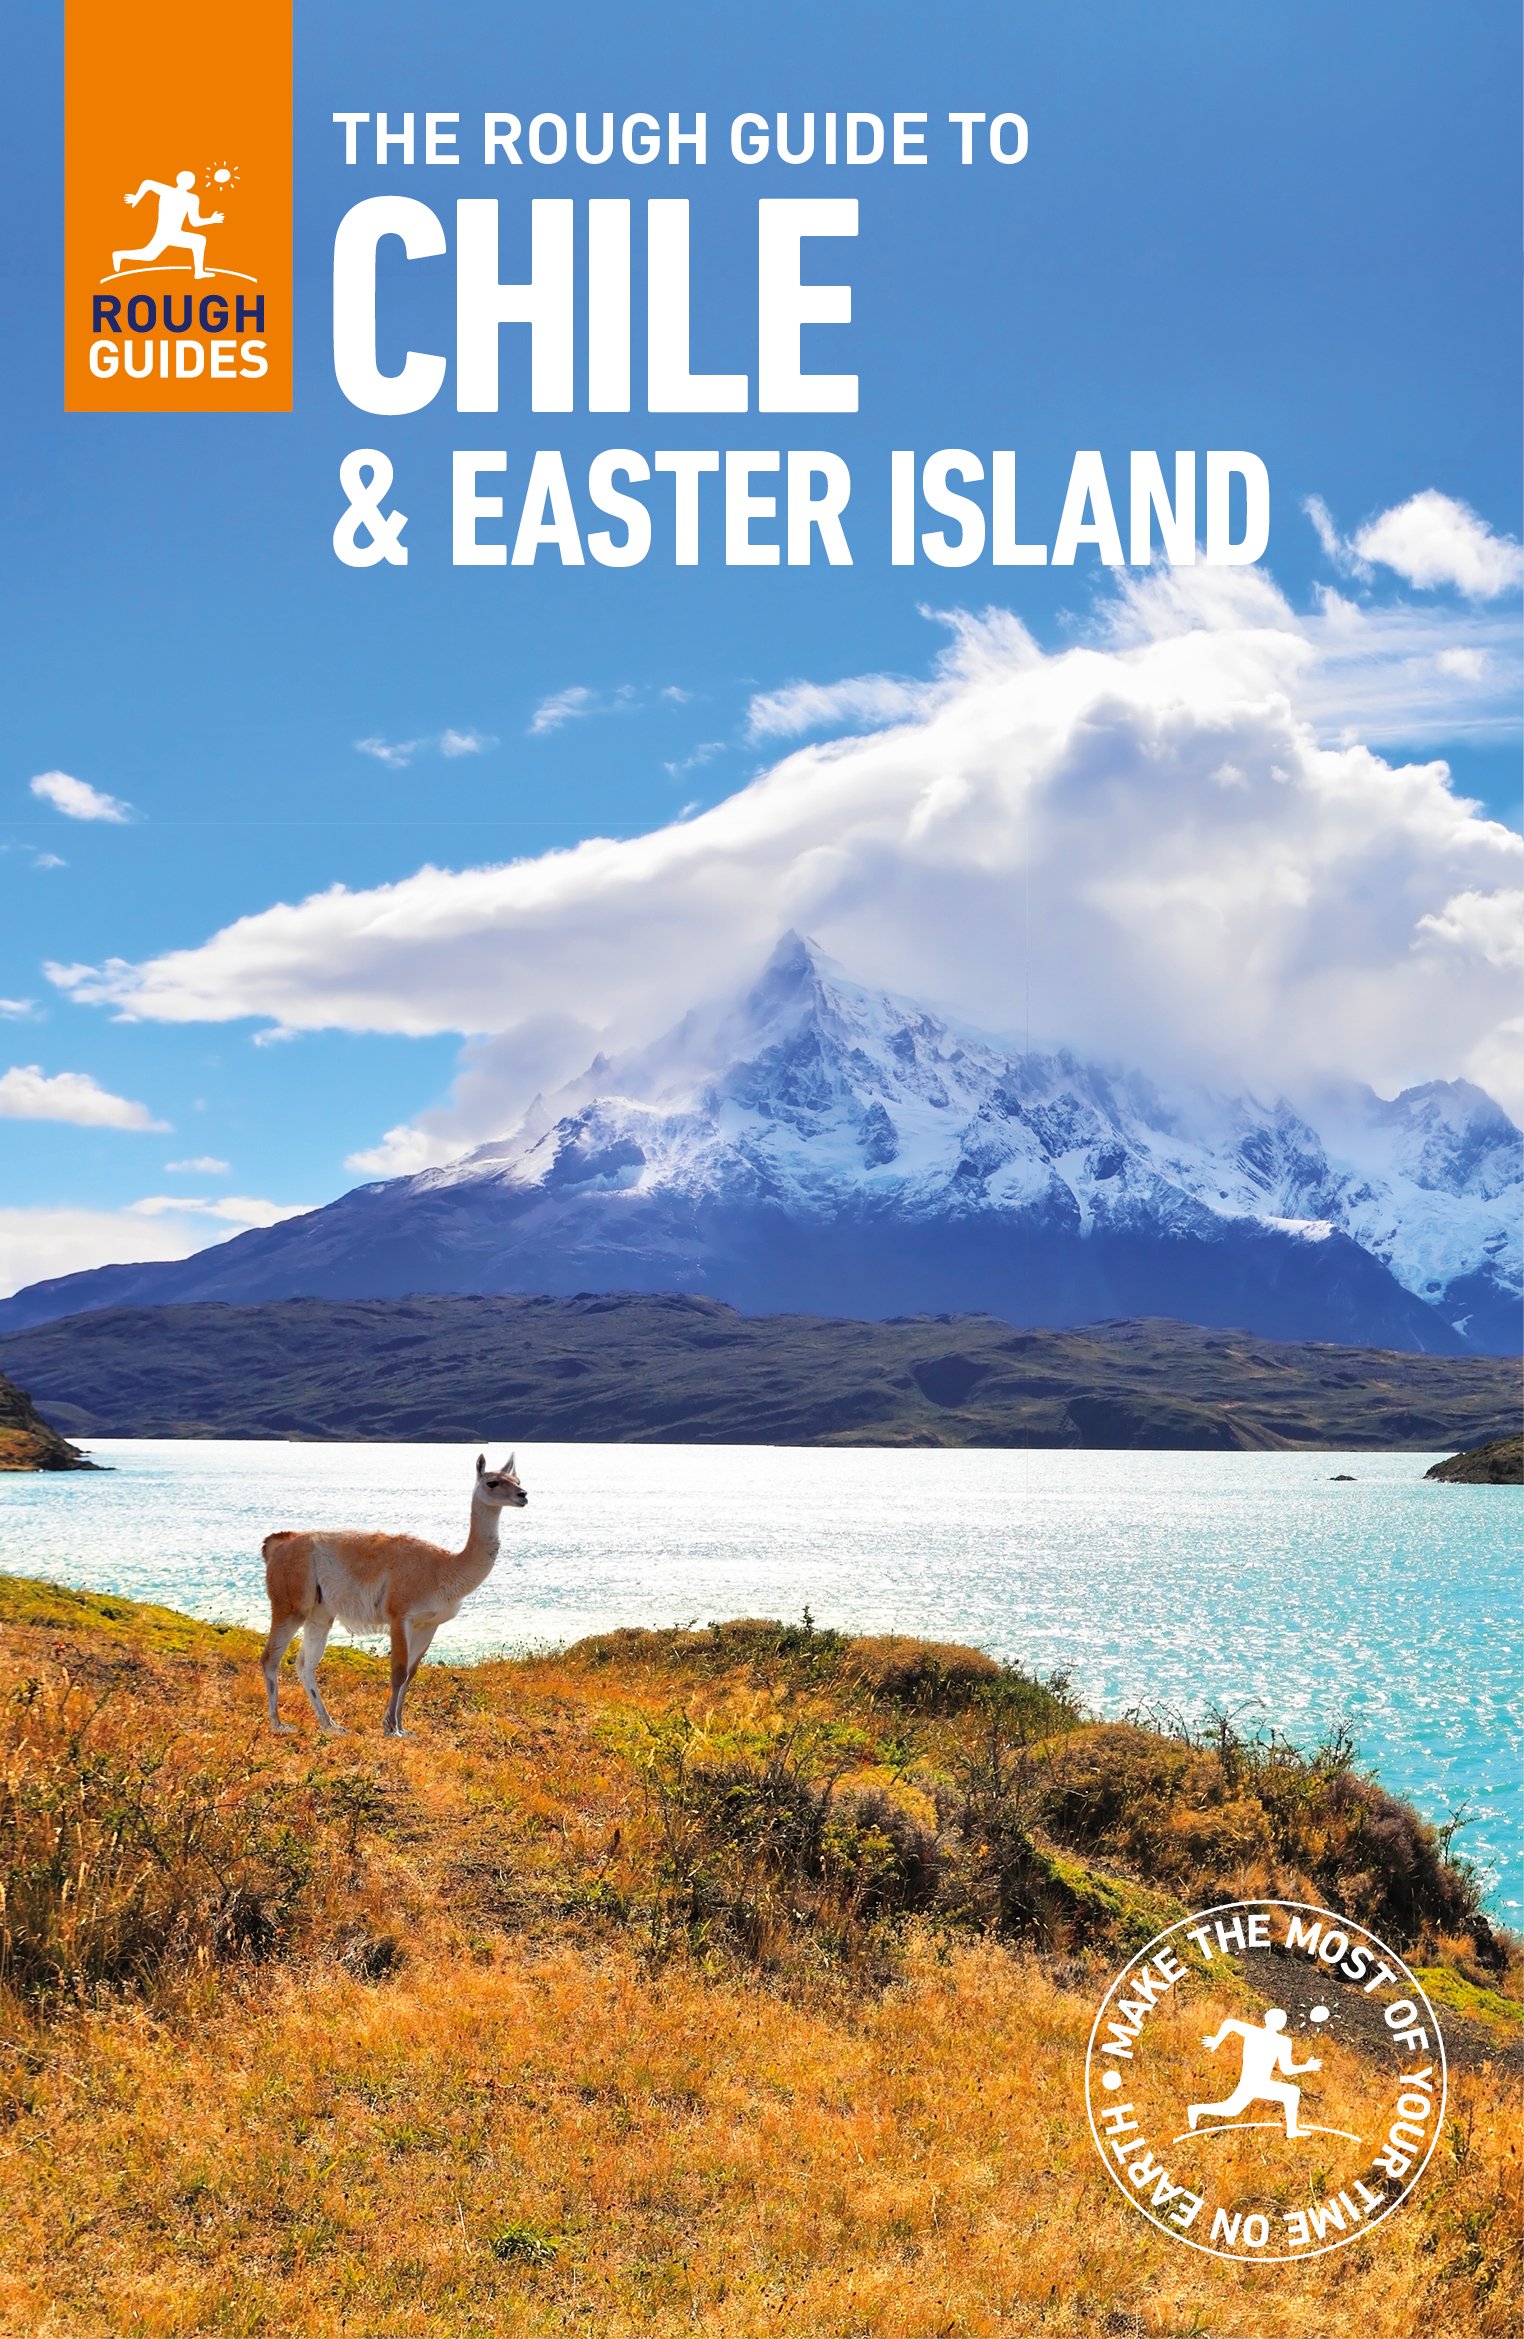 Rough Guide Chile & Easter Island (Chili en Paaseiland) 9780241311653  Rough Guide Rough Guides  Reisgidsen Chili